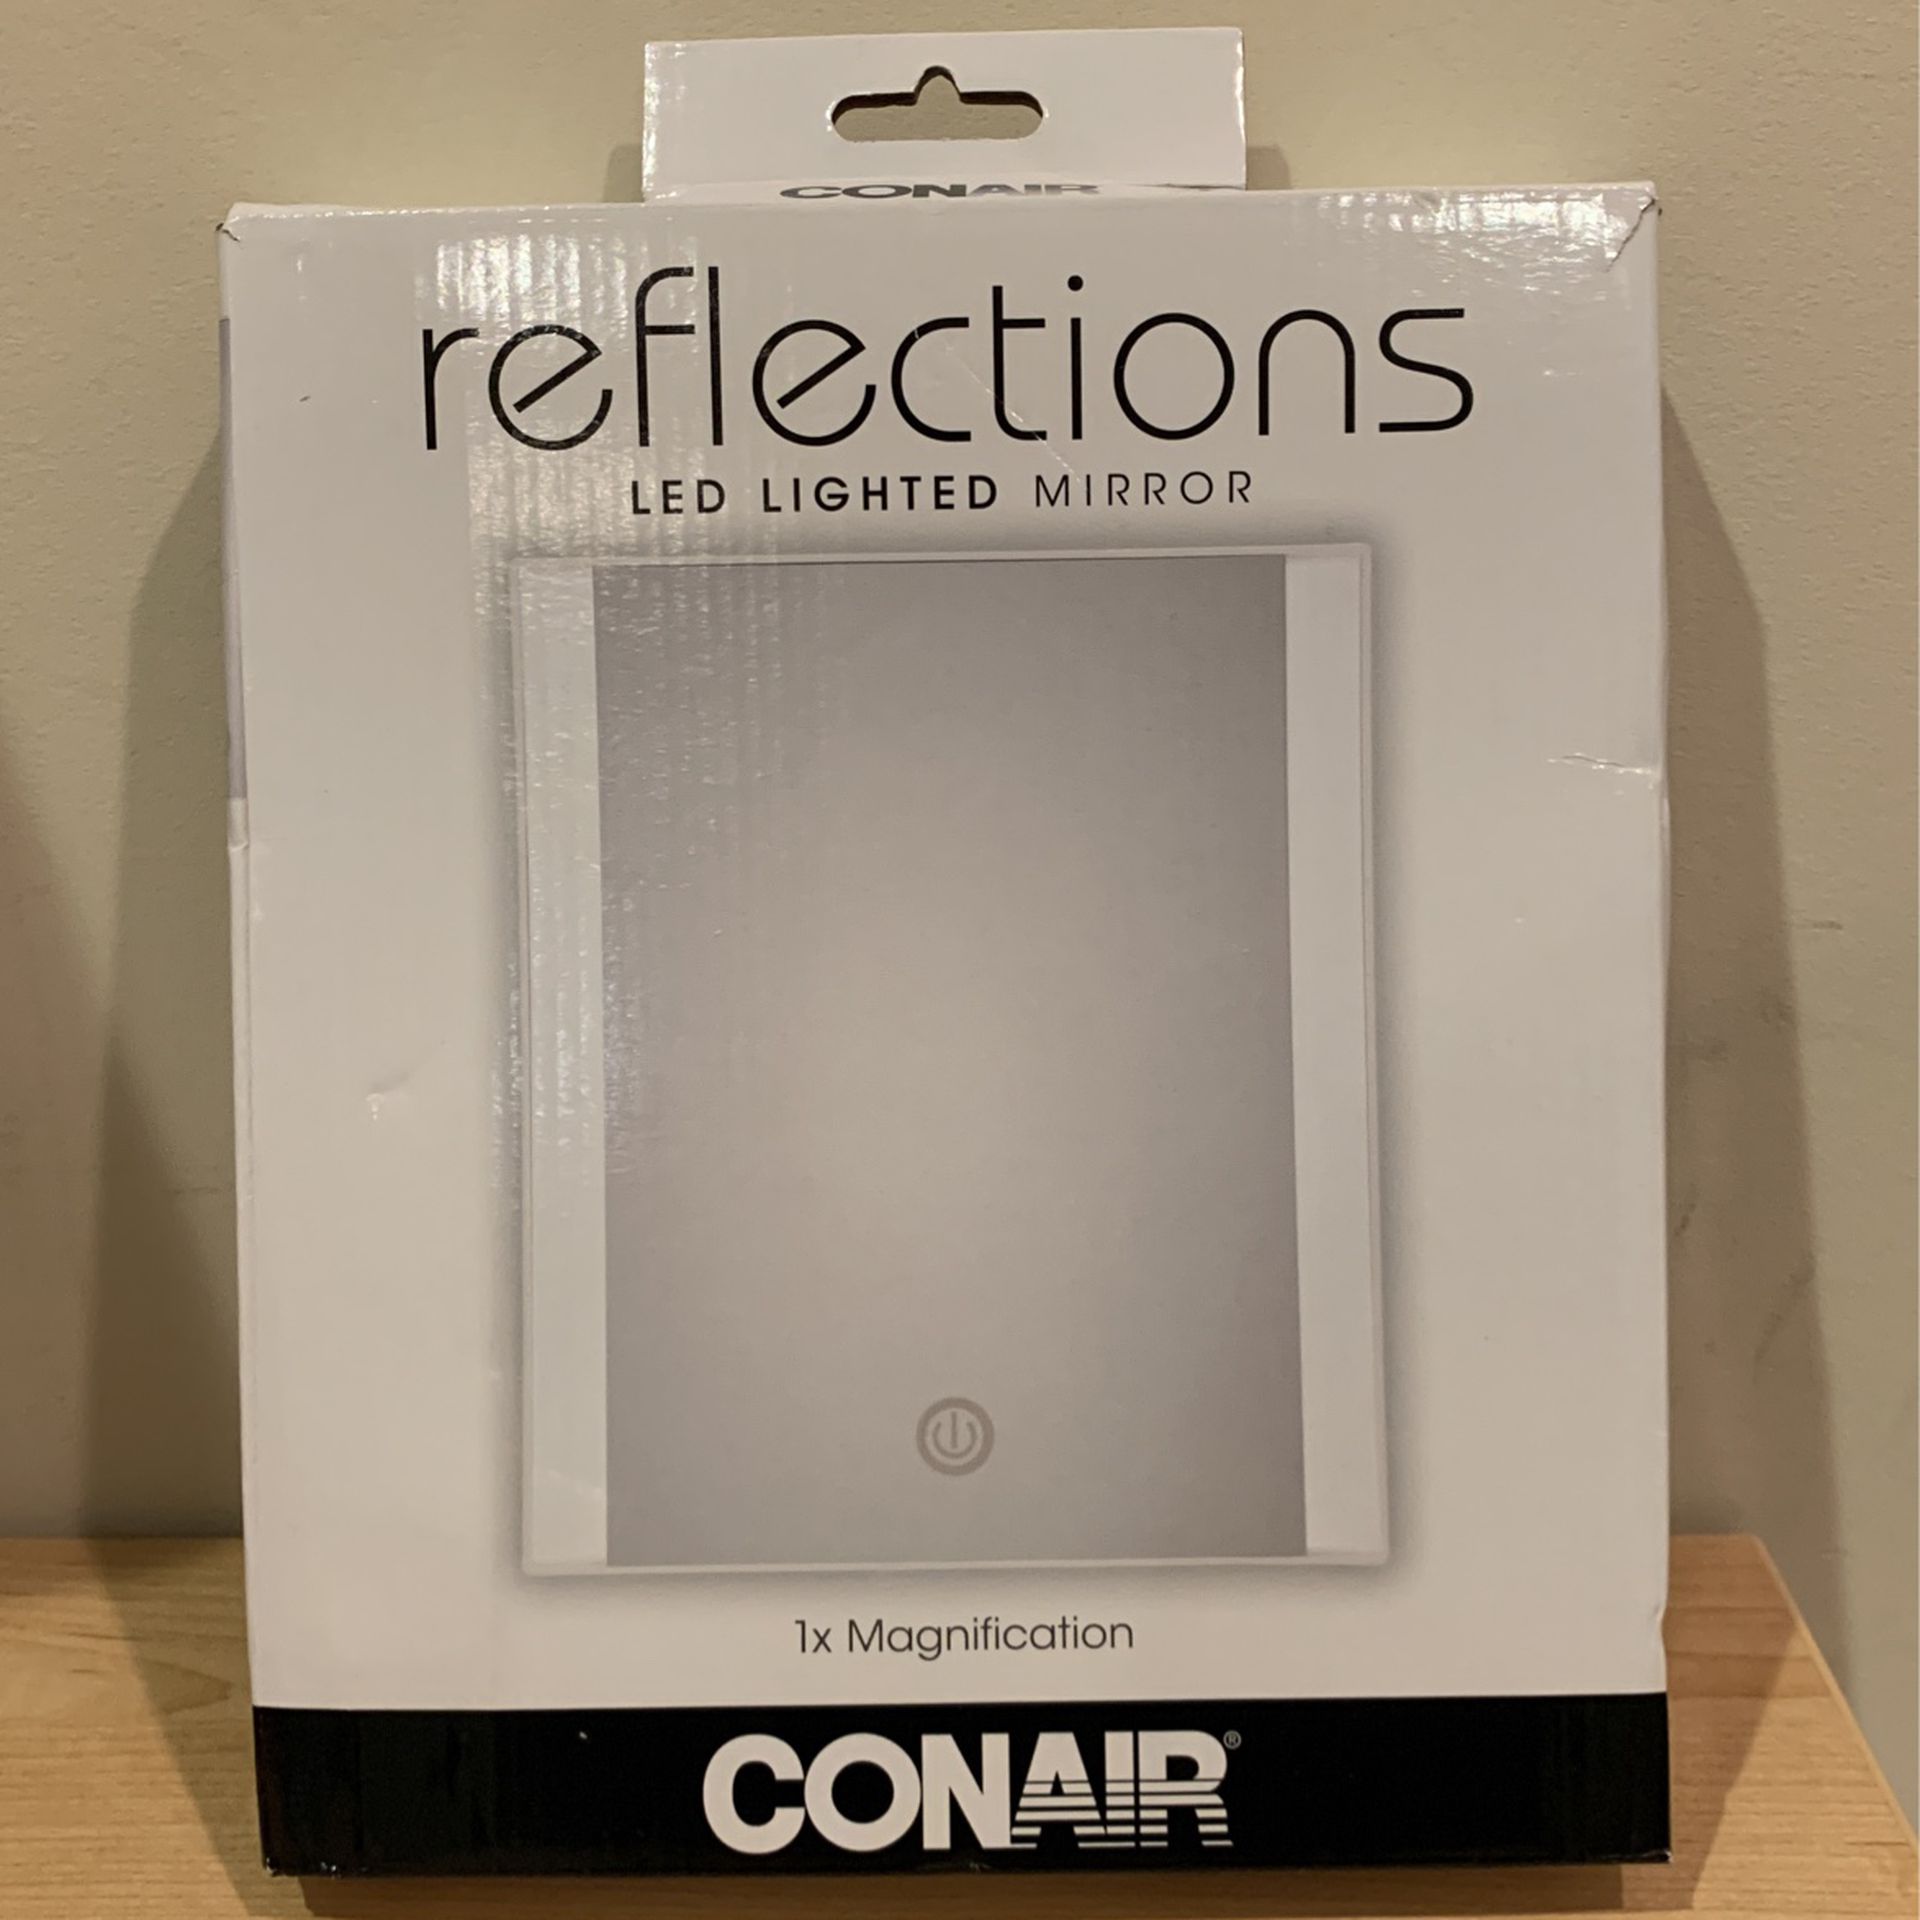 New in box Conair Reflections LED lighted makeup mirror